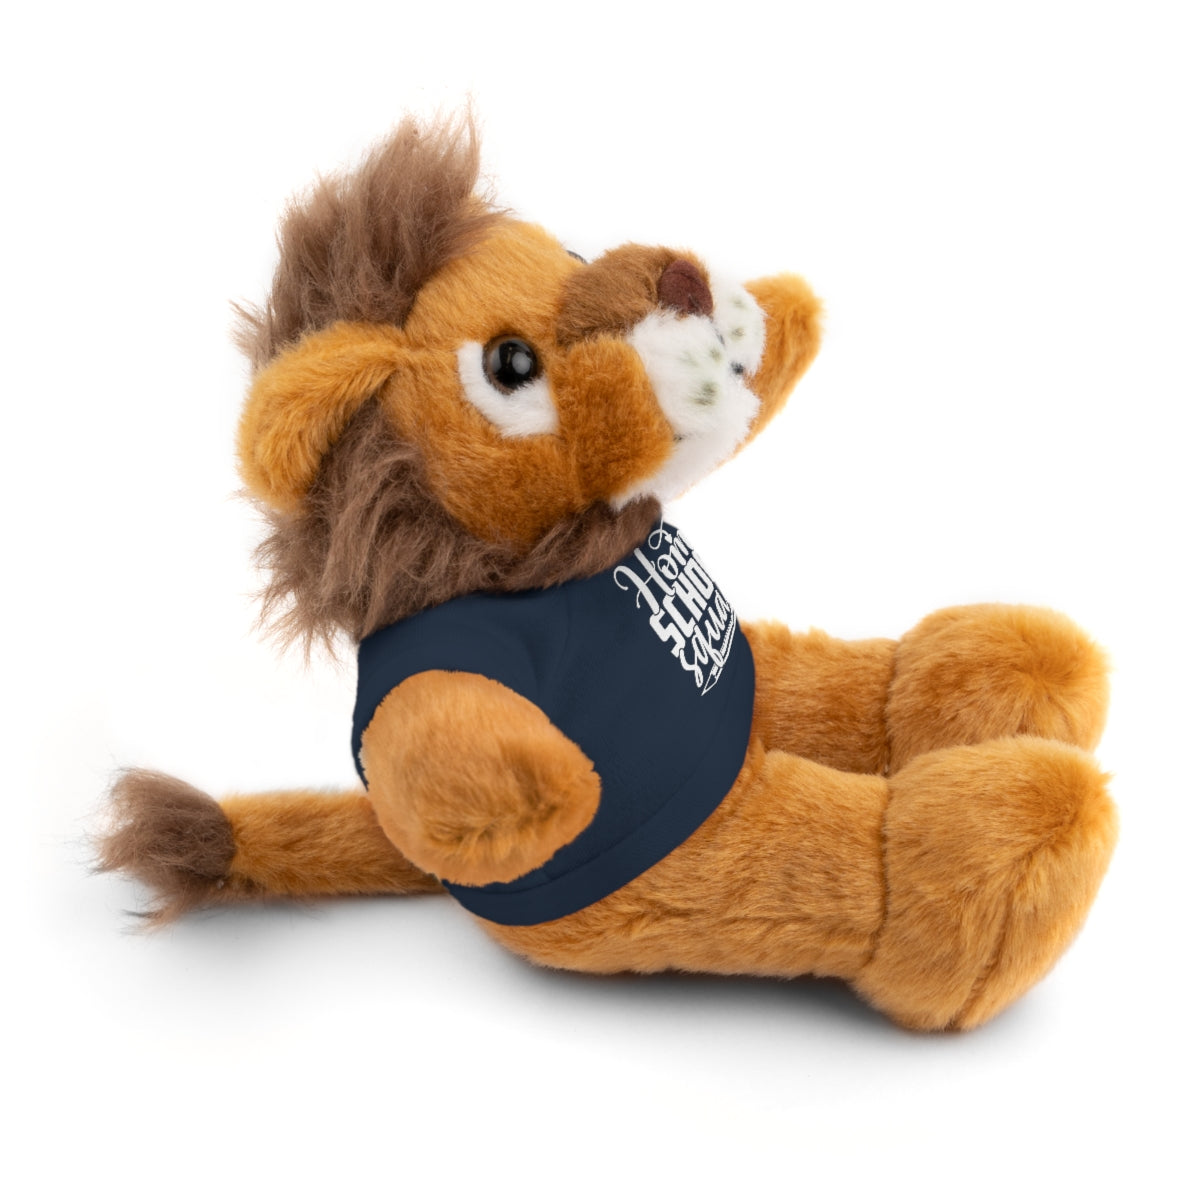 Homeschool Squad Stuffed Animals with Tee-Accessories-PureDesignTees